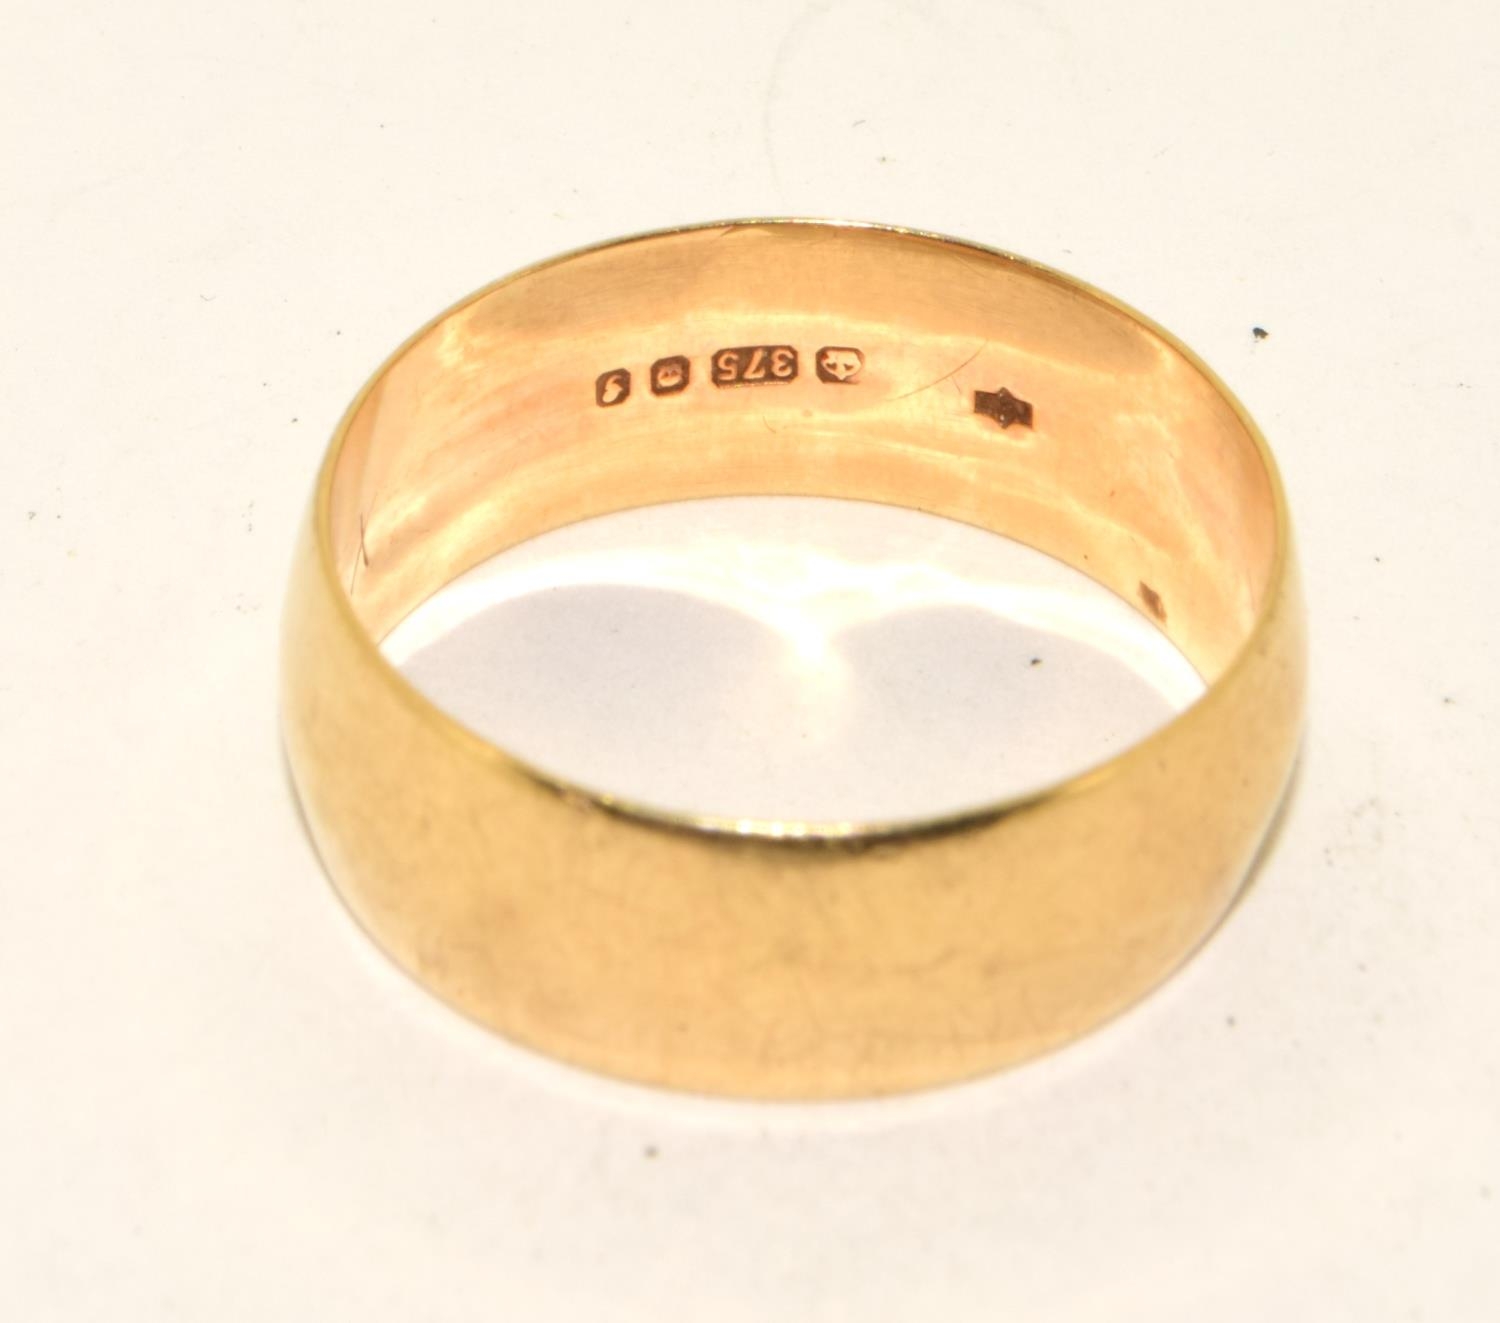 9ct gold wedding band 3.8g size R ref 64 - Image 2 of 3